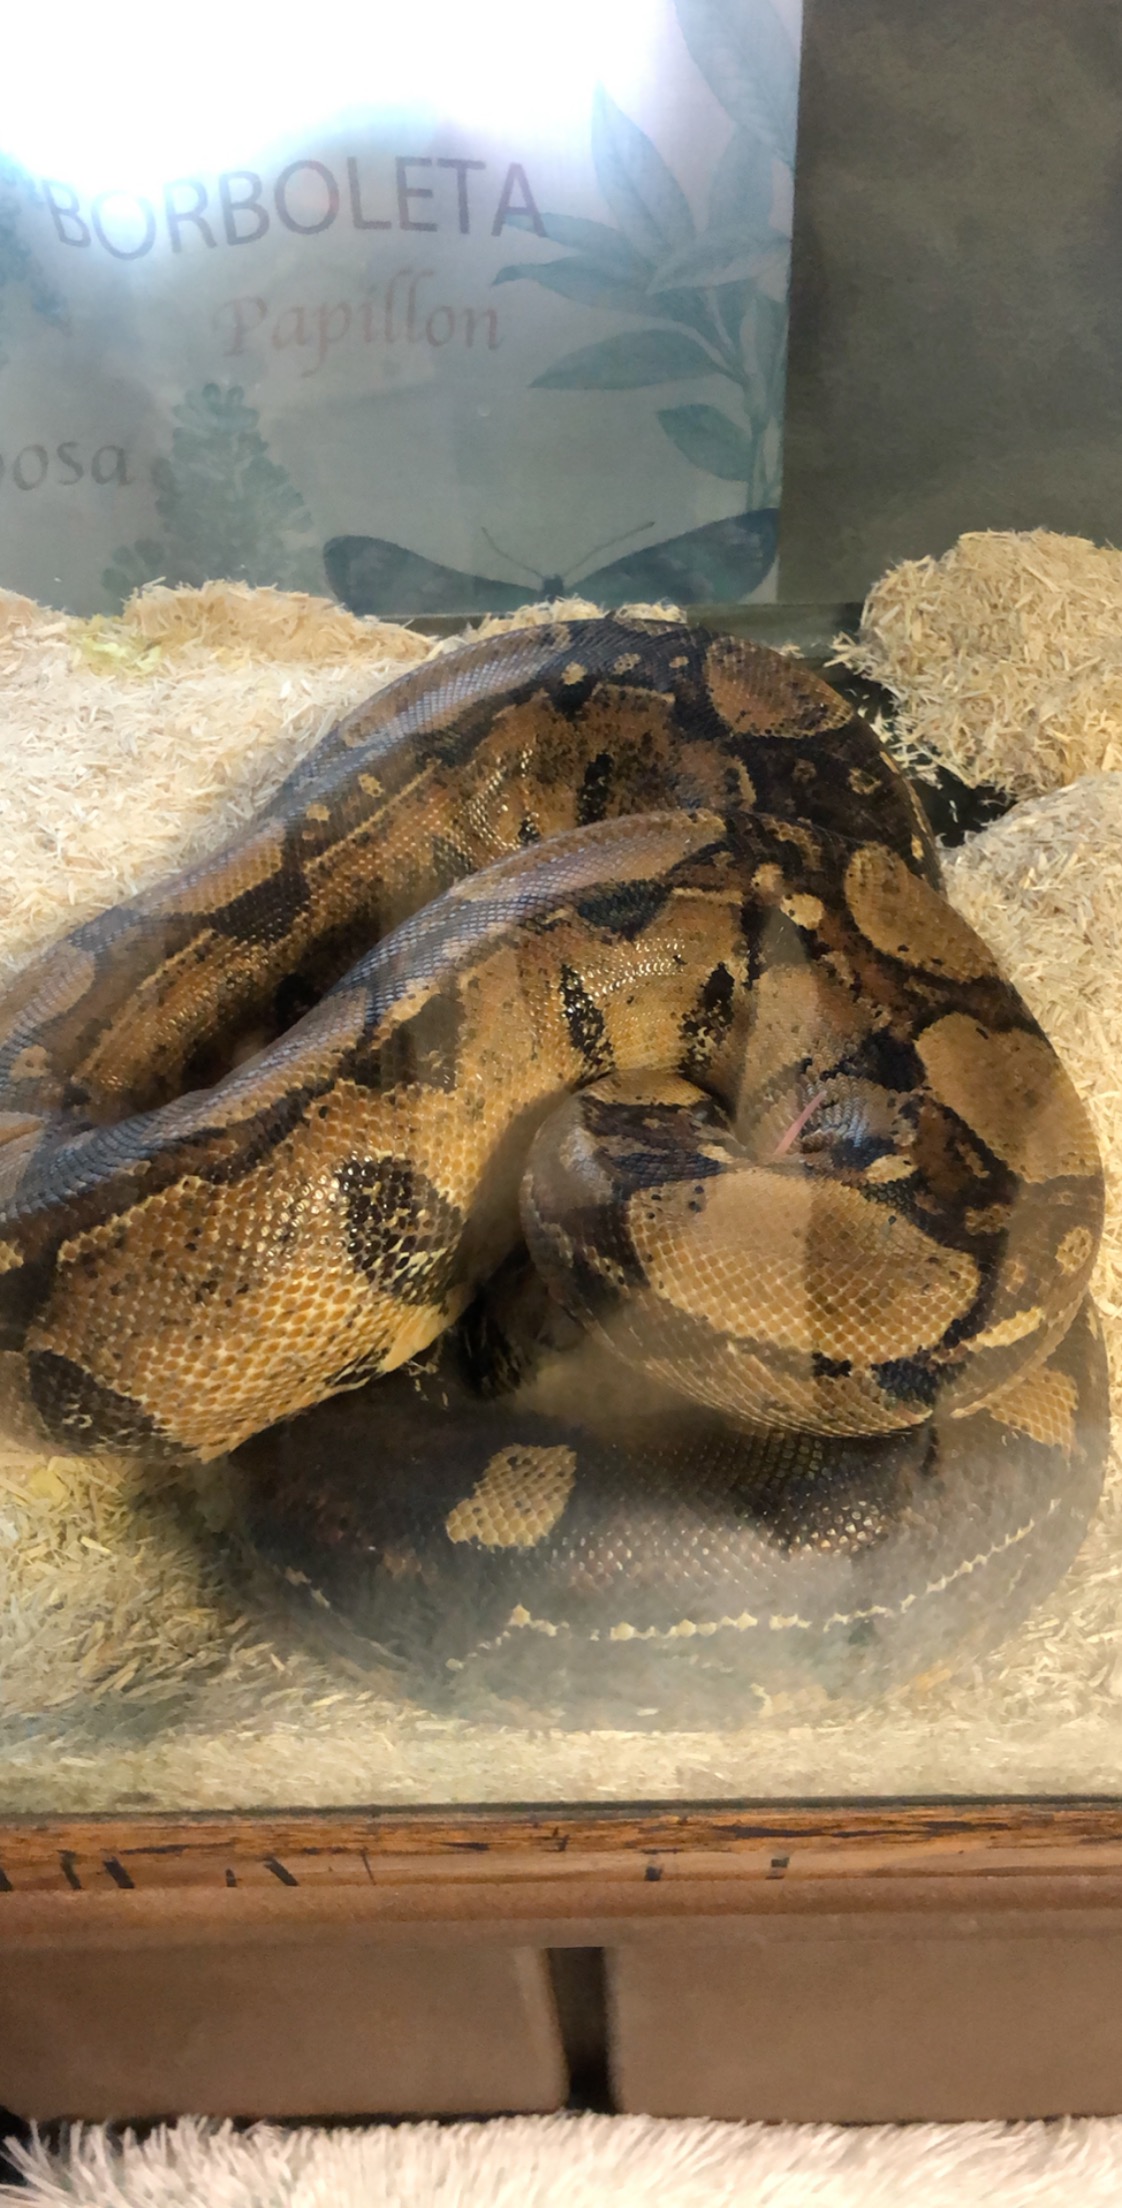 Squaretail Boa Constrictor by Boa Besotted